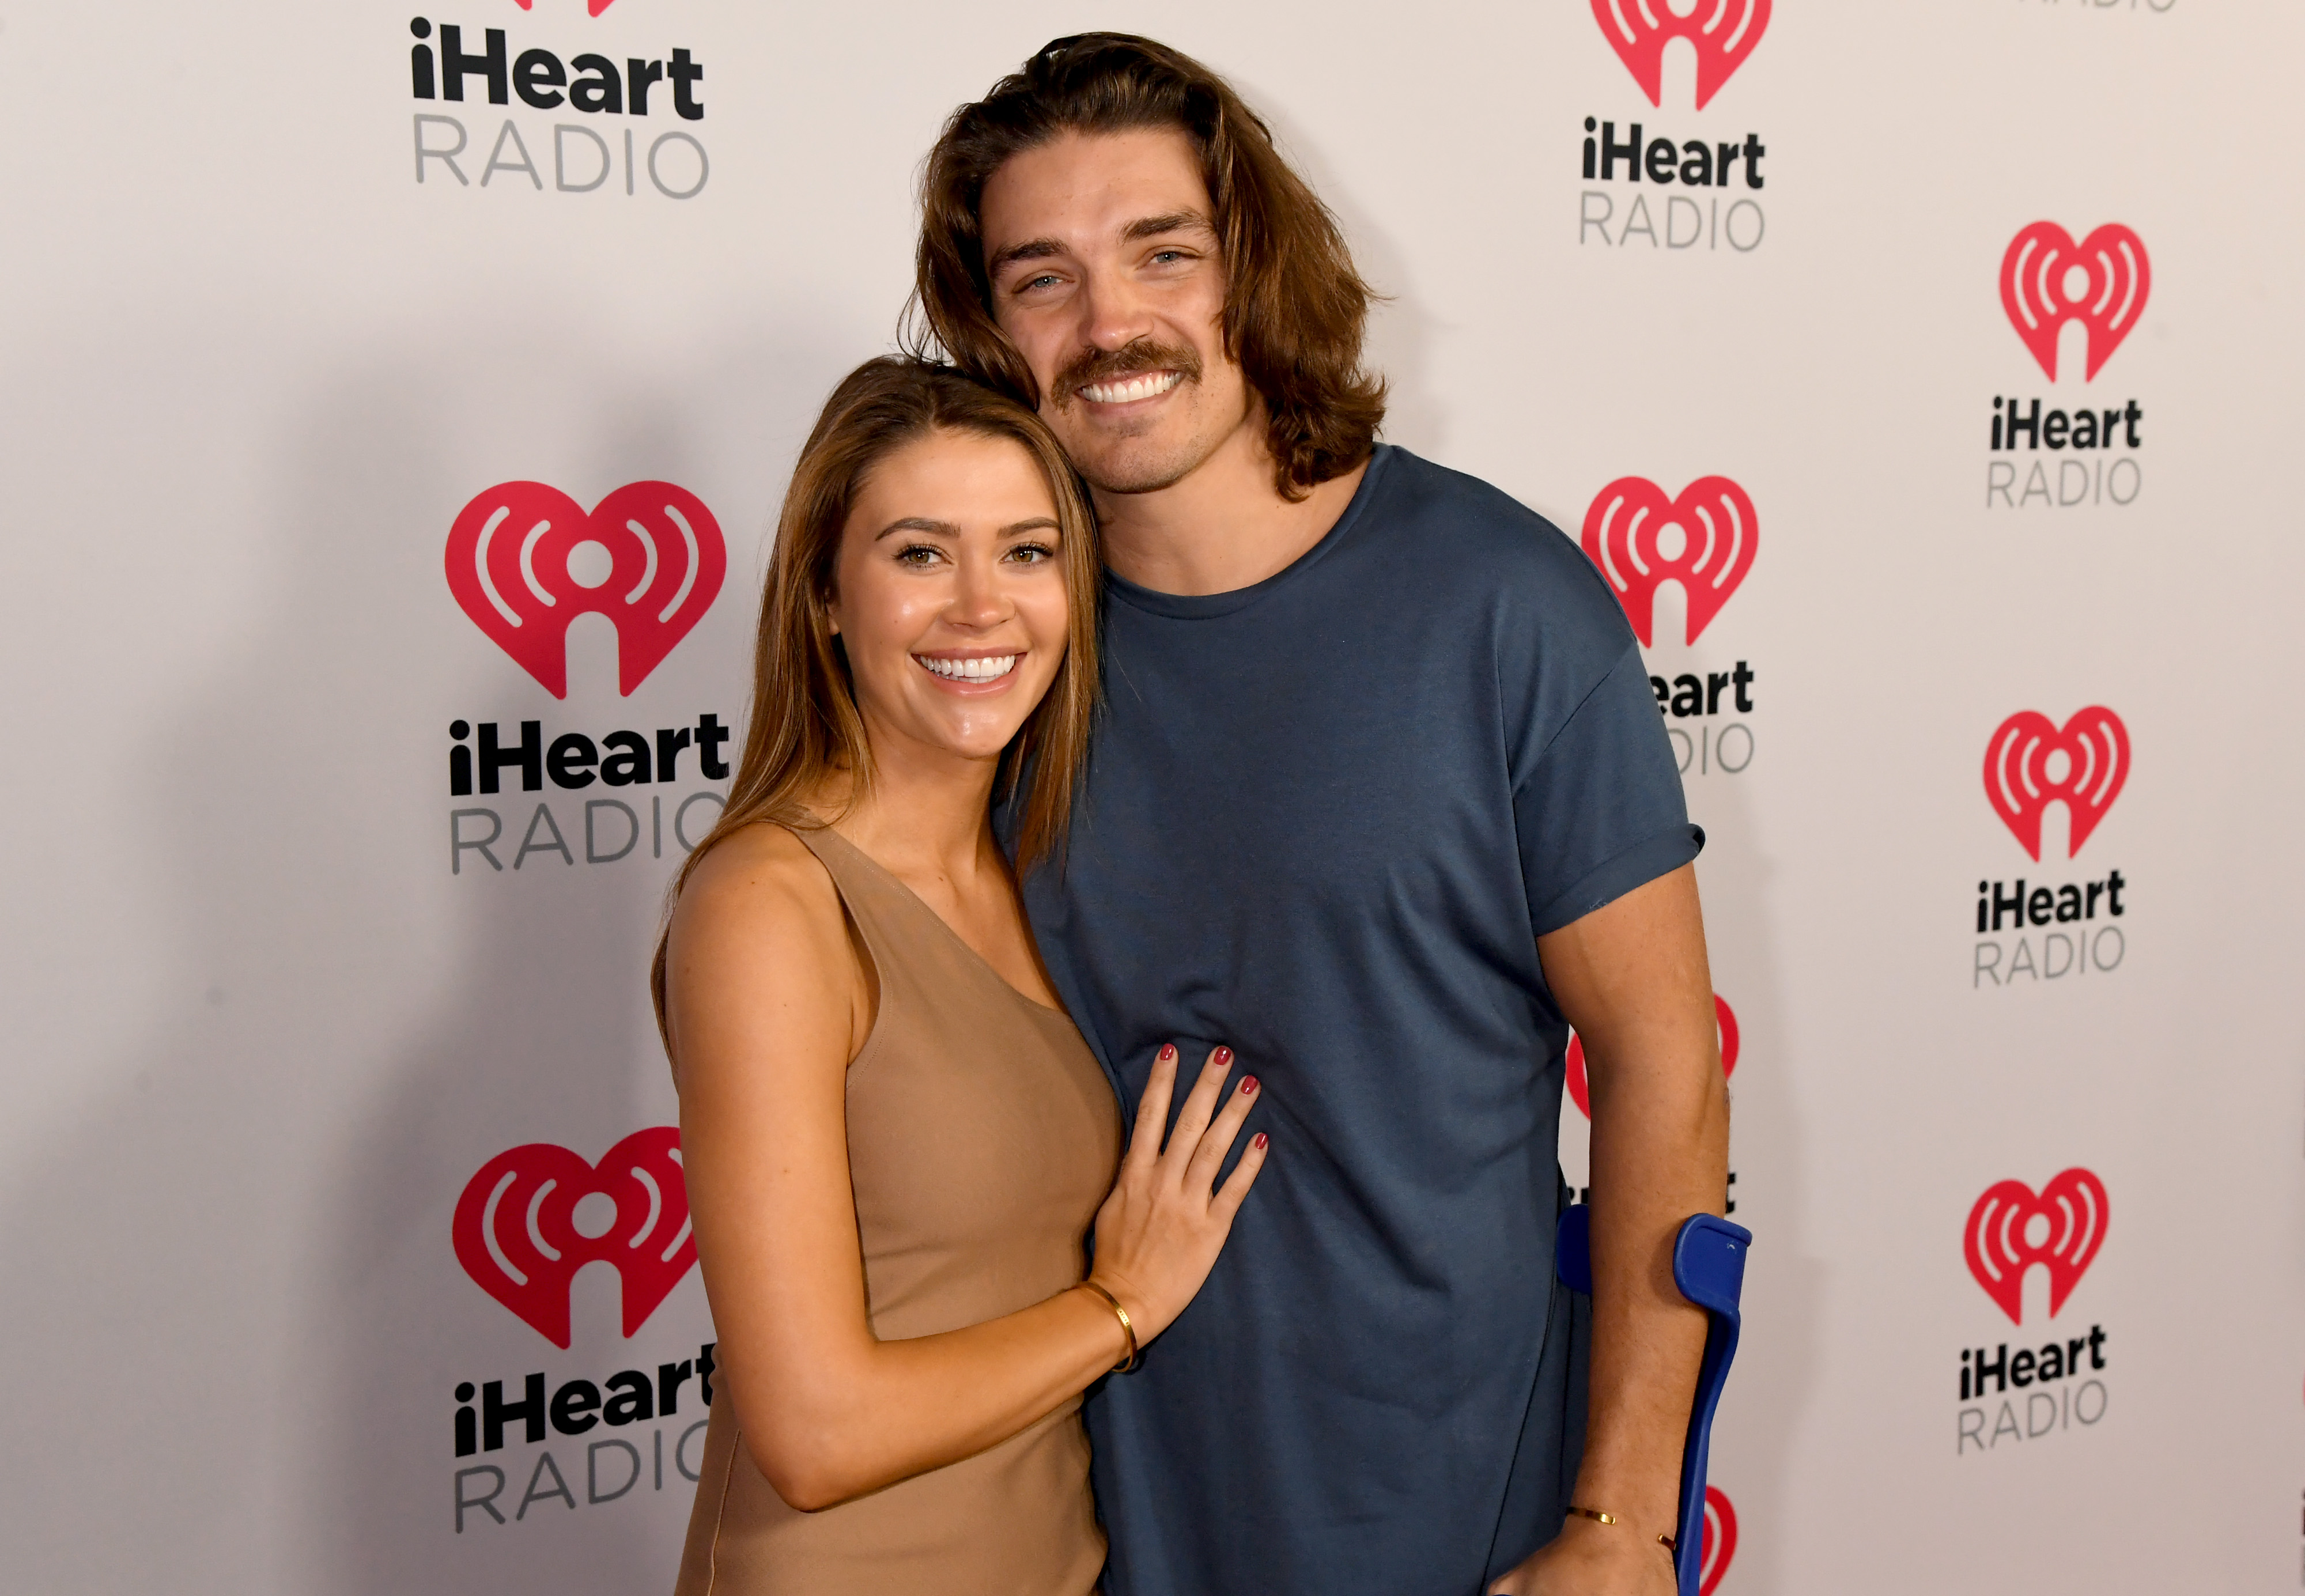 Caelynn Miller-Keyes and Dean Unglert pose together at an iHeart Radio event.